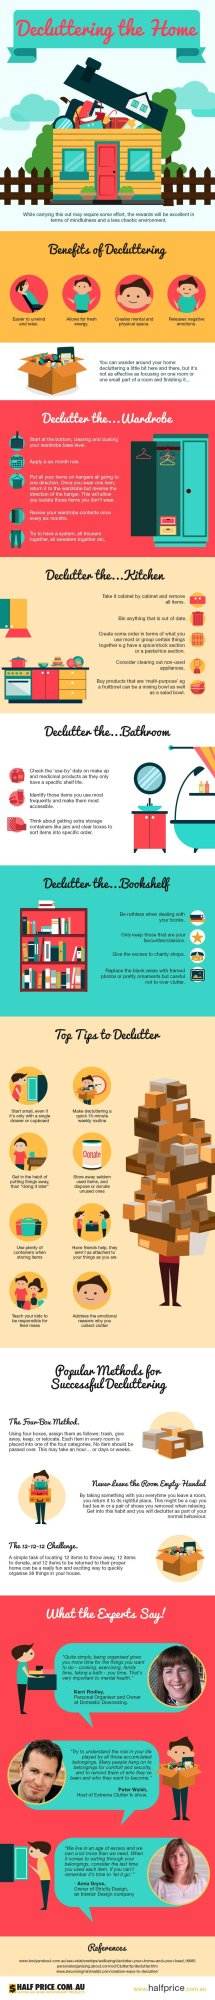 28 Awesome Tips on How To Declutter your Home (Infographic) first time home buyers